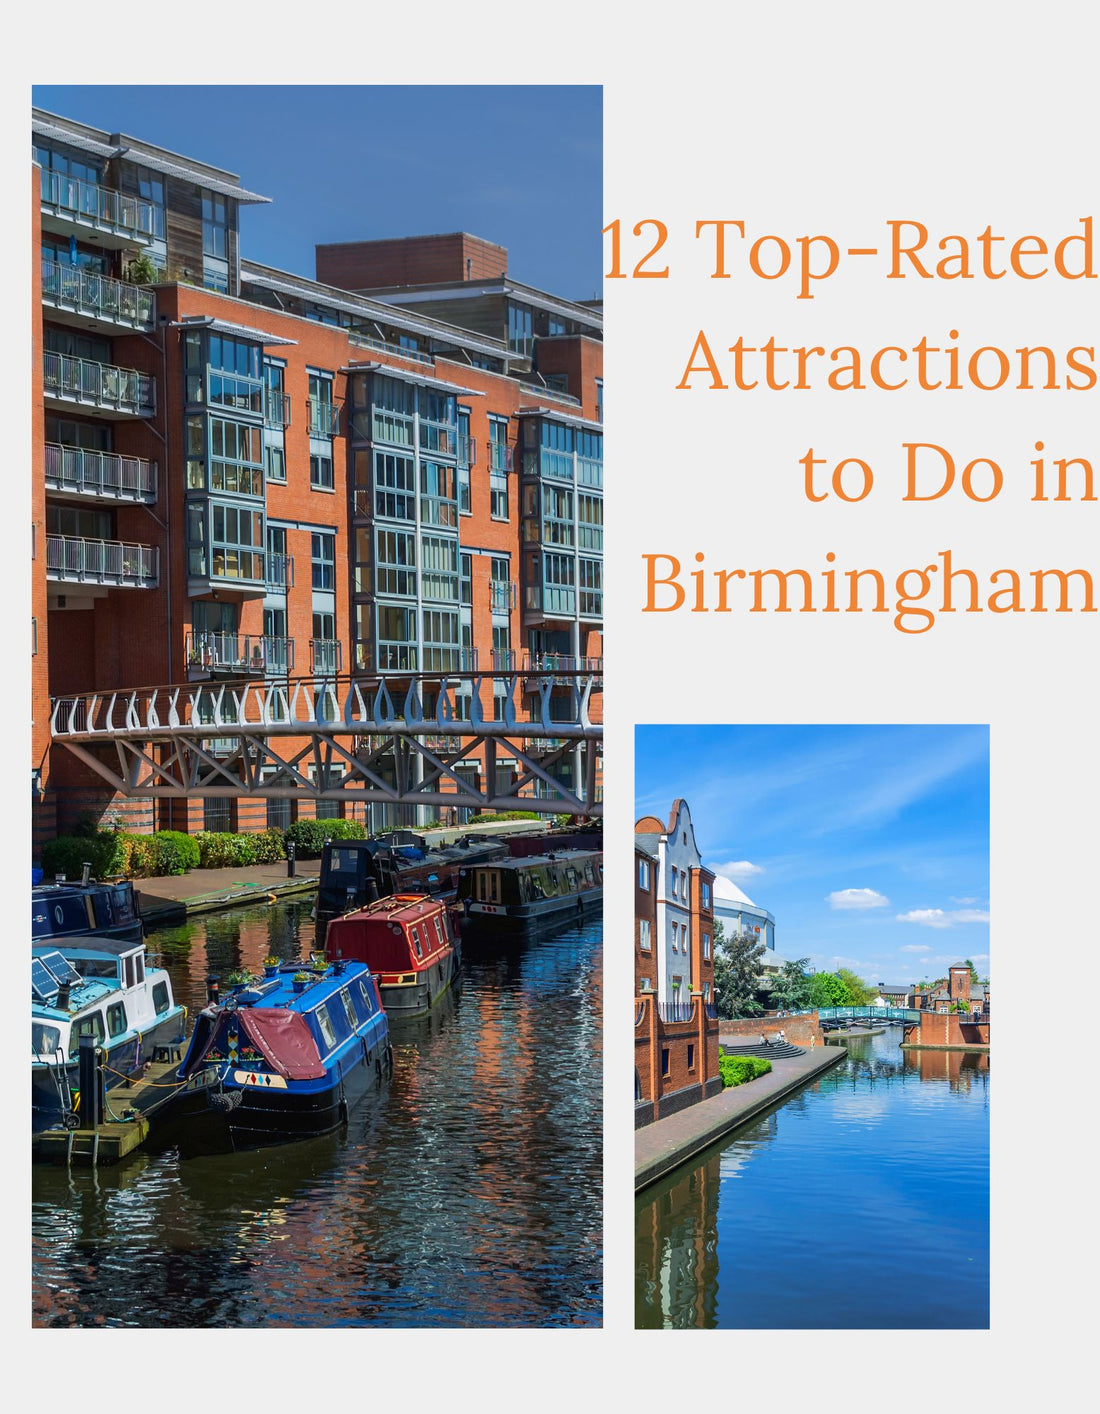 12 Top-Rated Attractions to Do in Birmingham